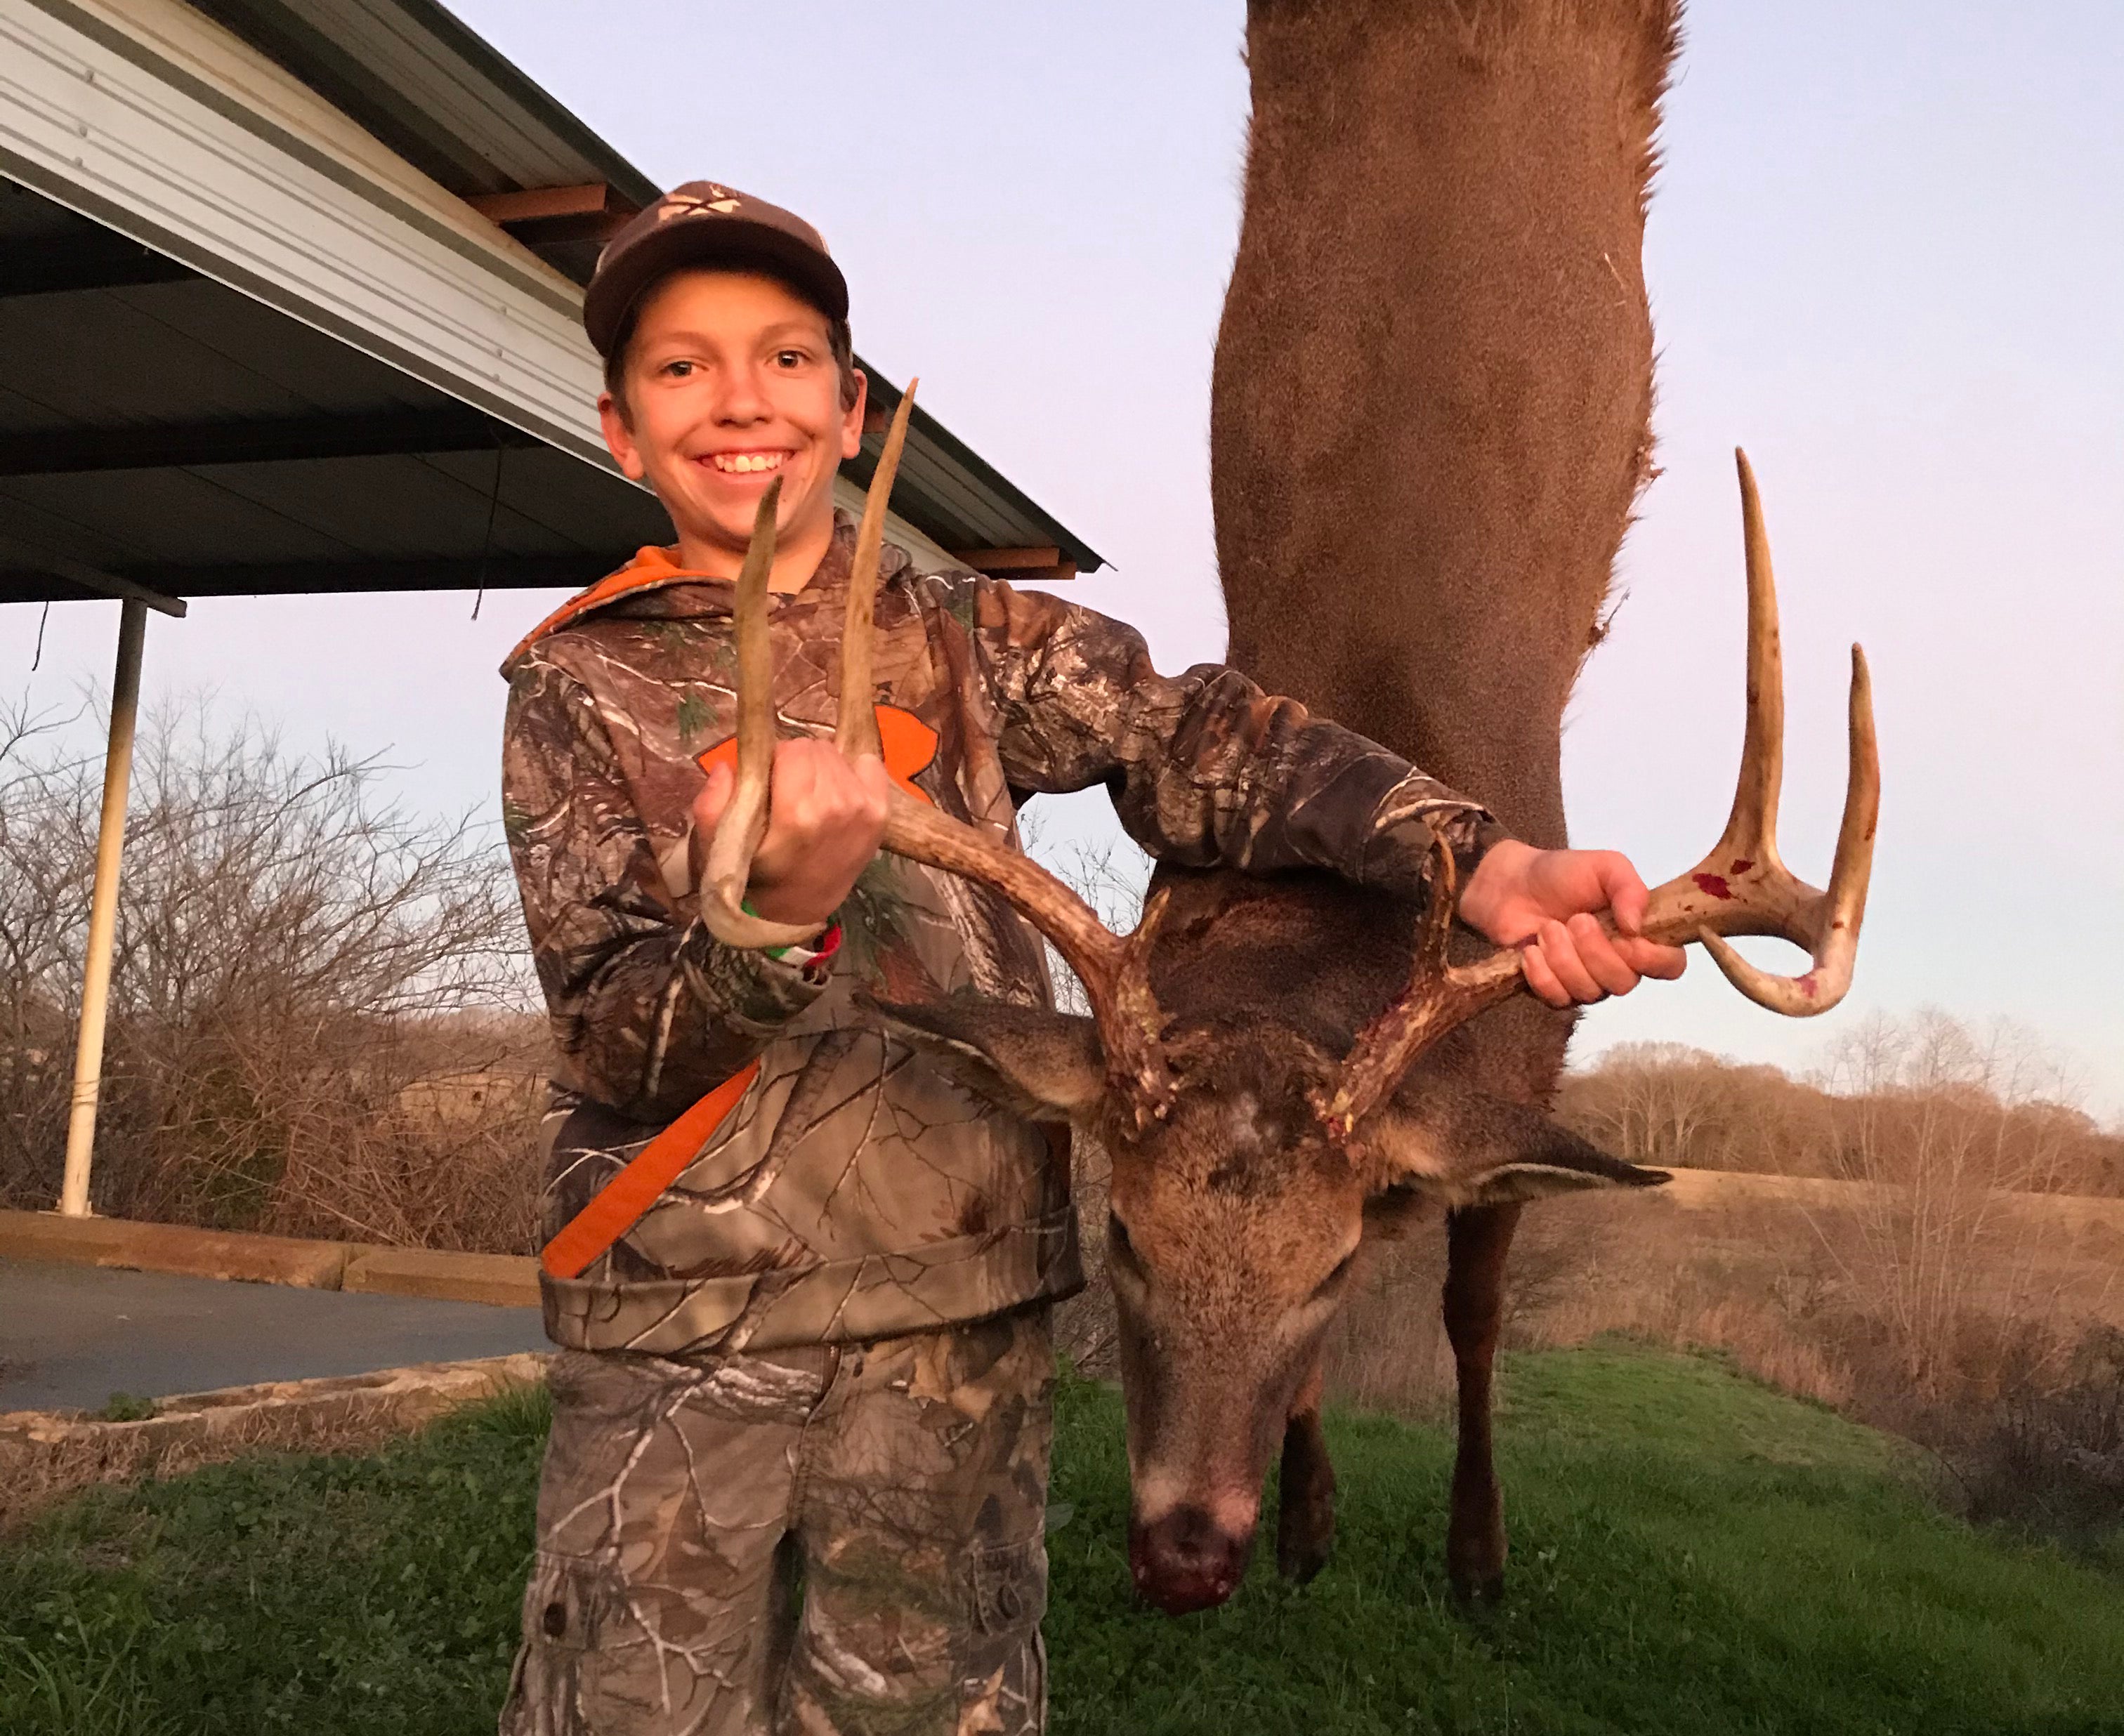 12-year-old Cade Smith from Jemison, Alabama, harvested an 8-point buck during a FWFTA Youth Hunt in January 2020.